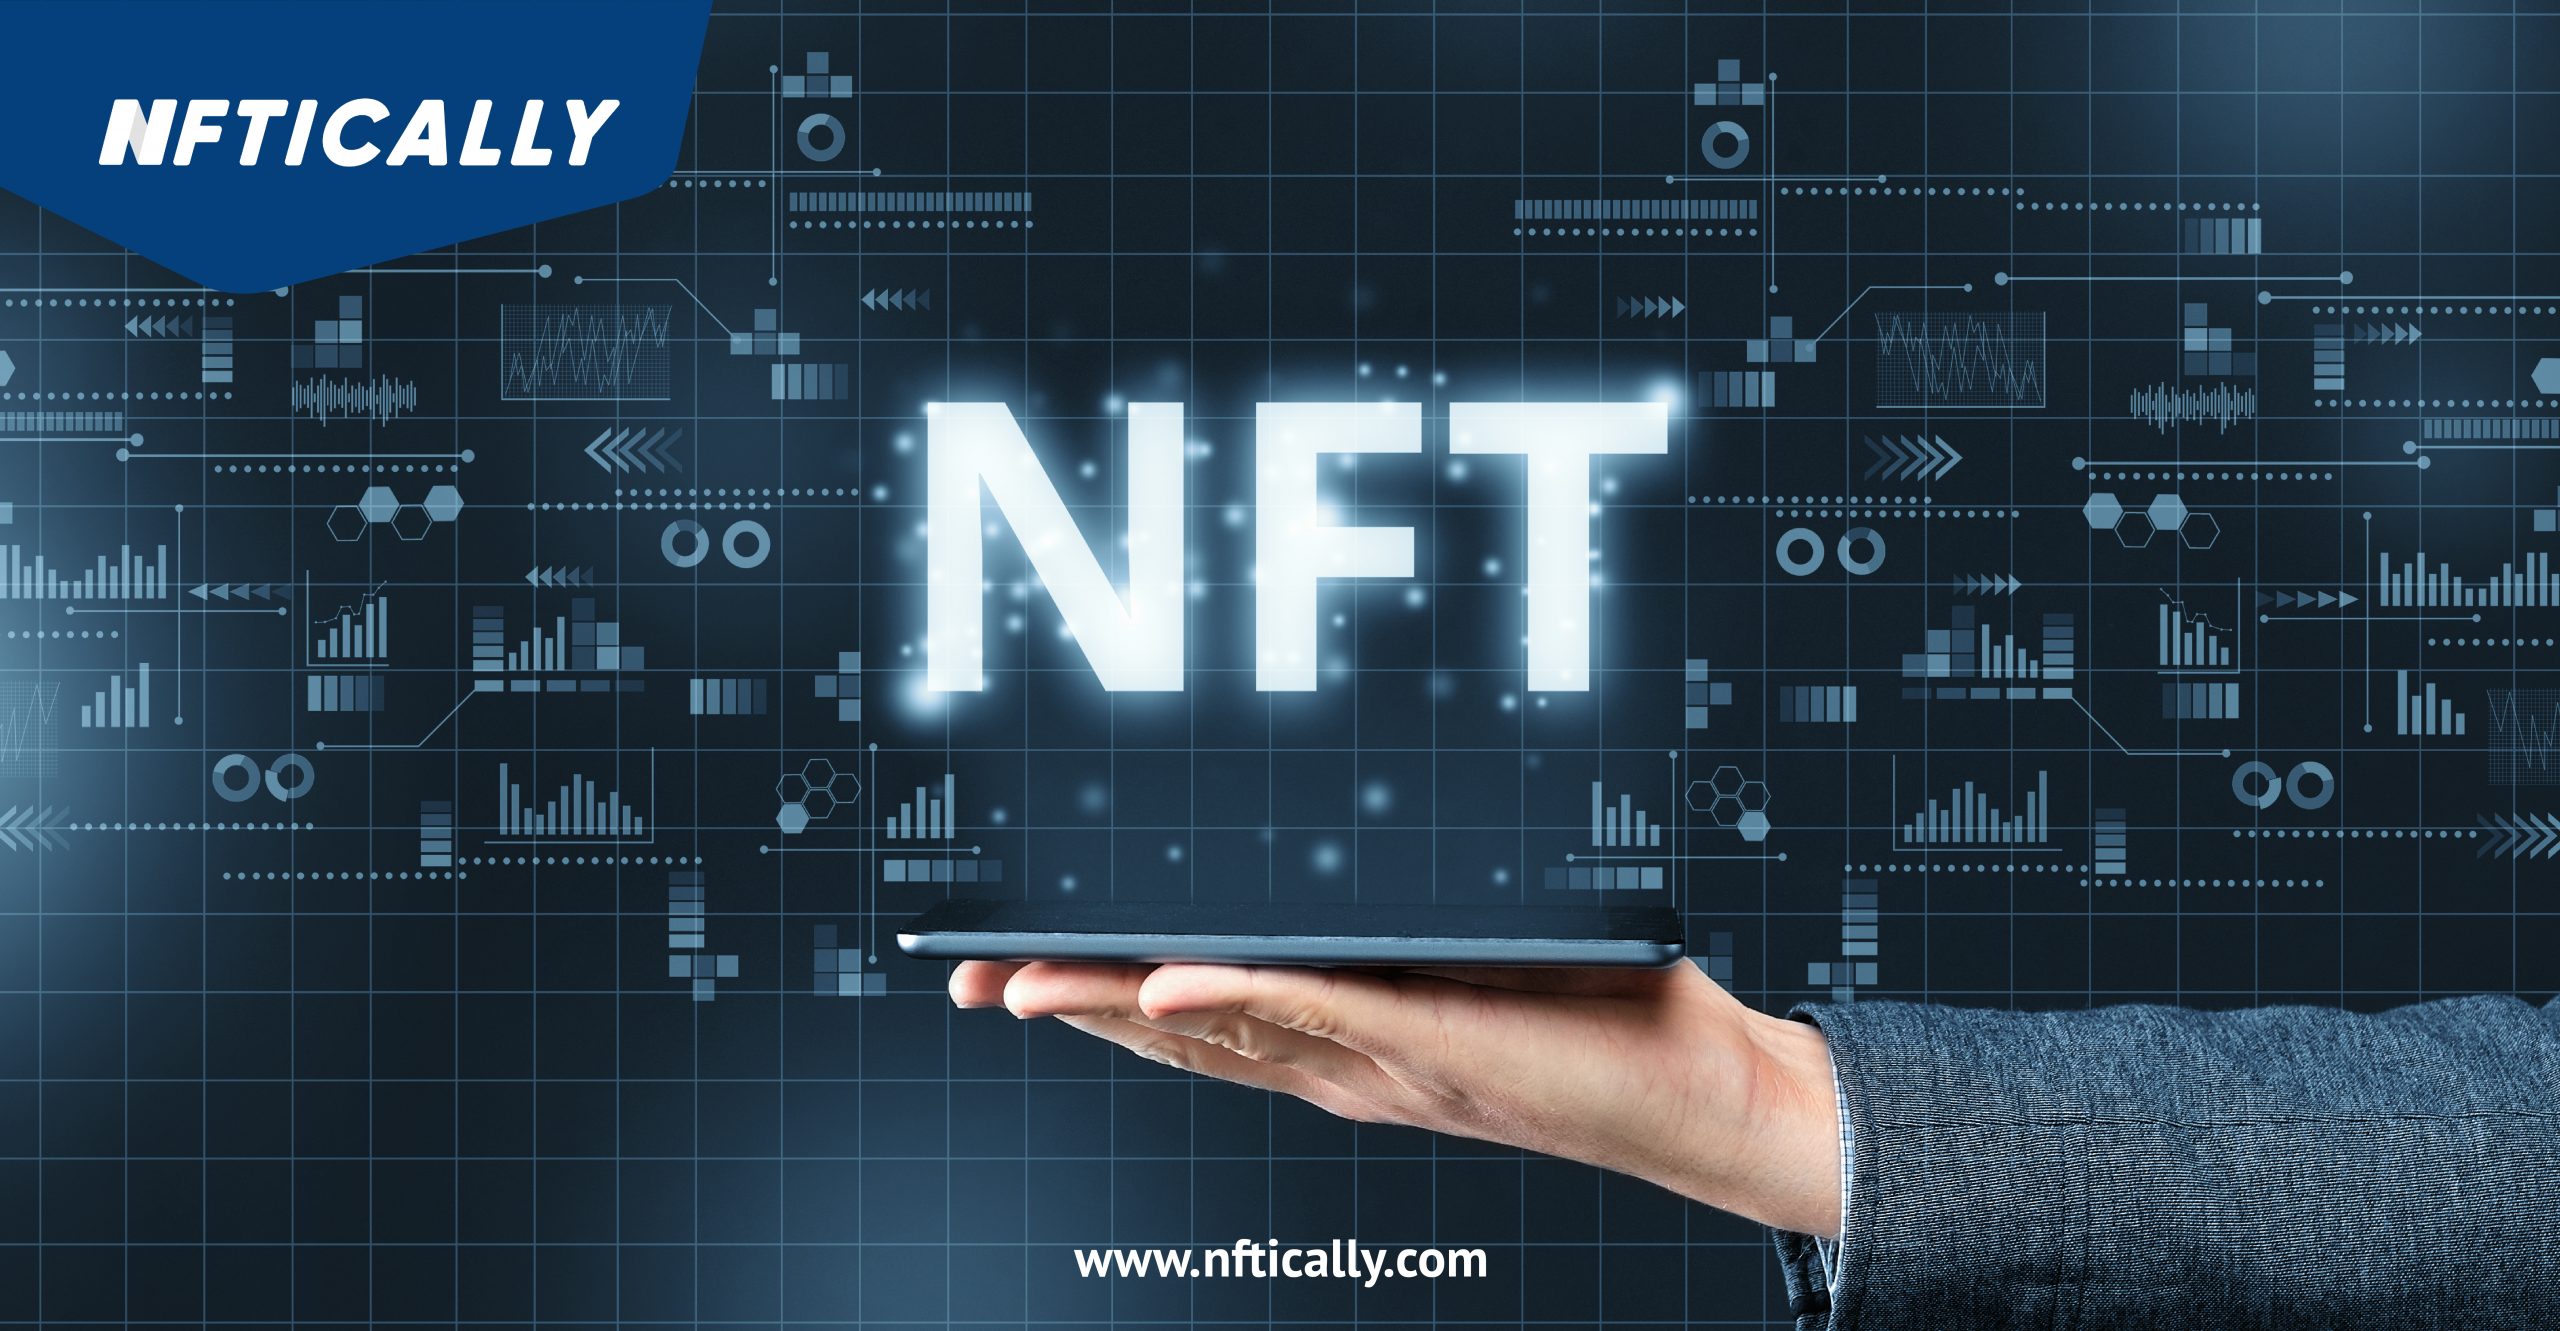 Top NFT projects to follow in 2022